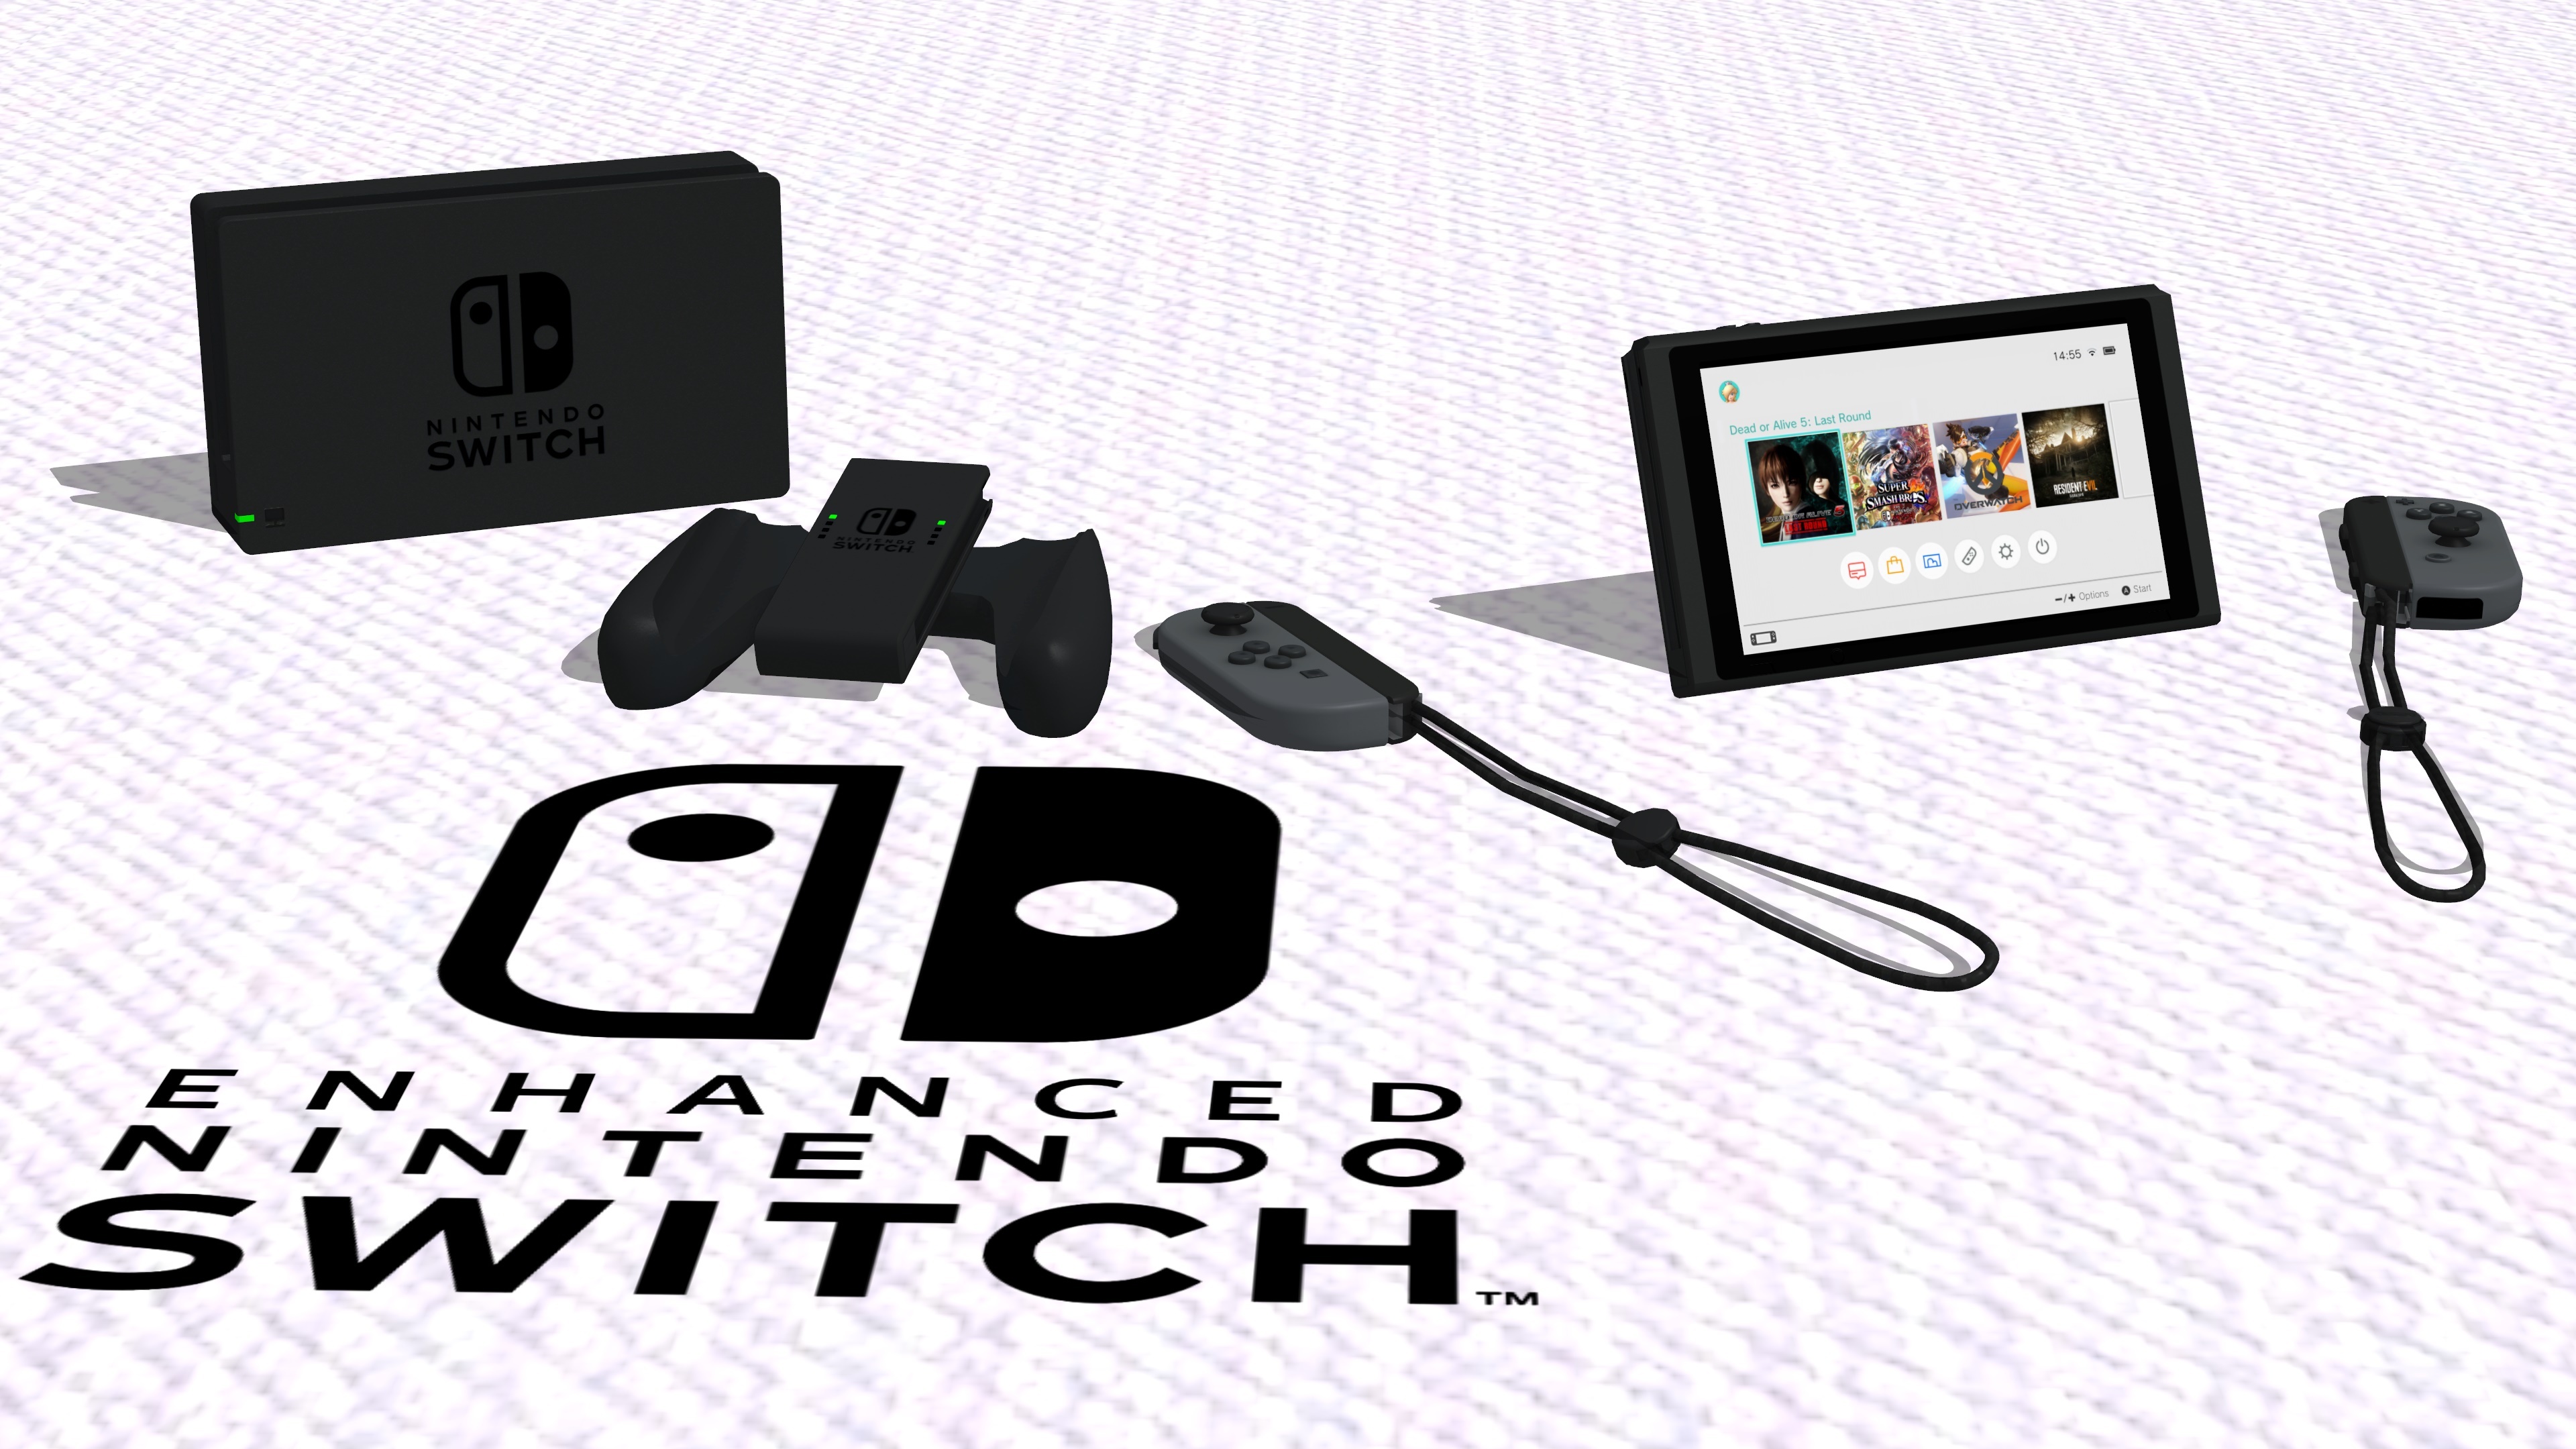 Nintendo: Equipped with a 6-inch, 720p capacitive touch screen, Gaming device. 3840x2160 4K Wallpaper.